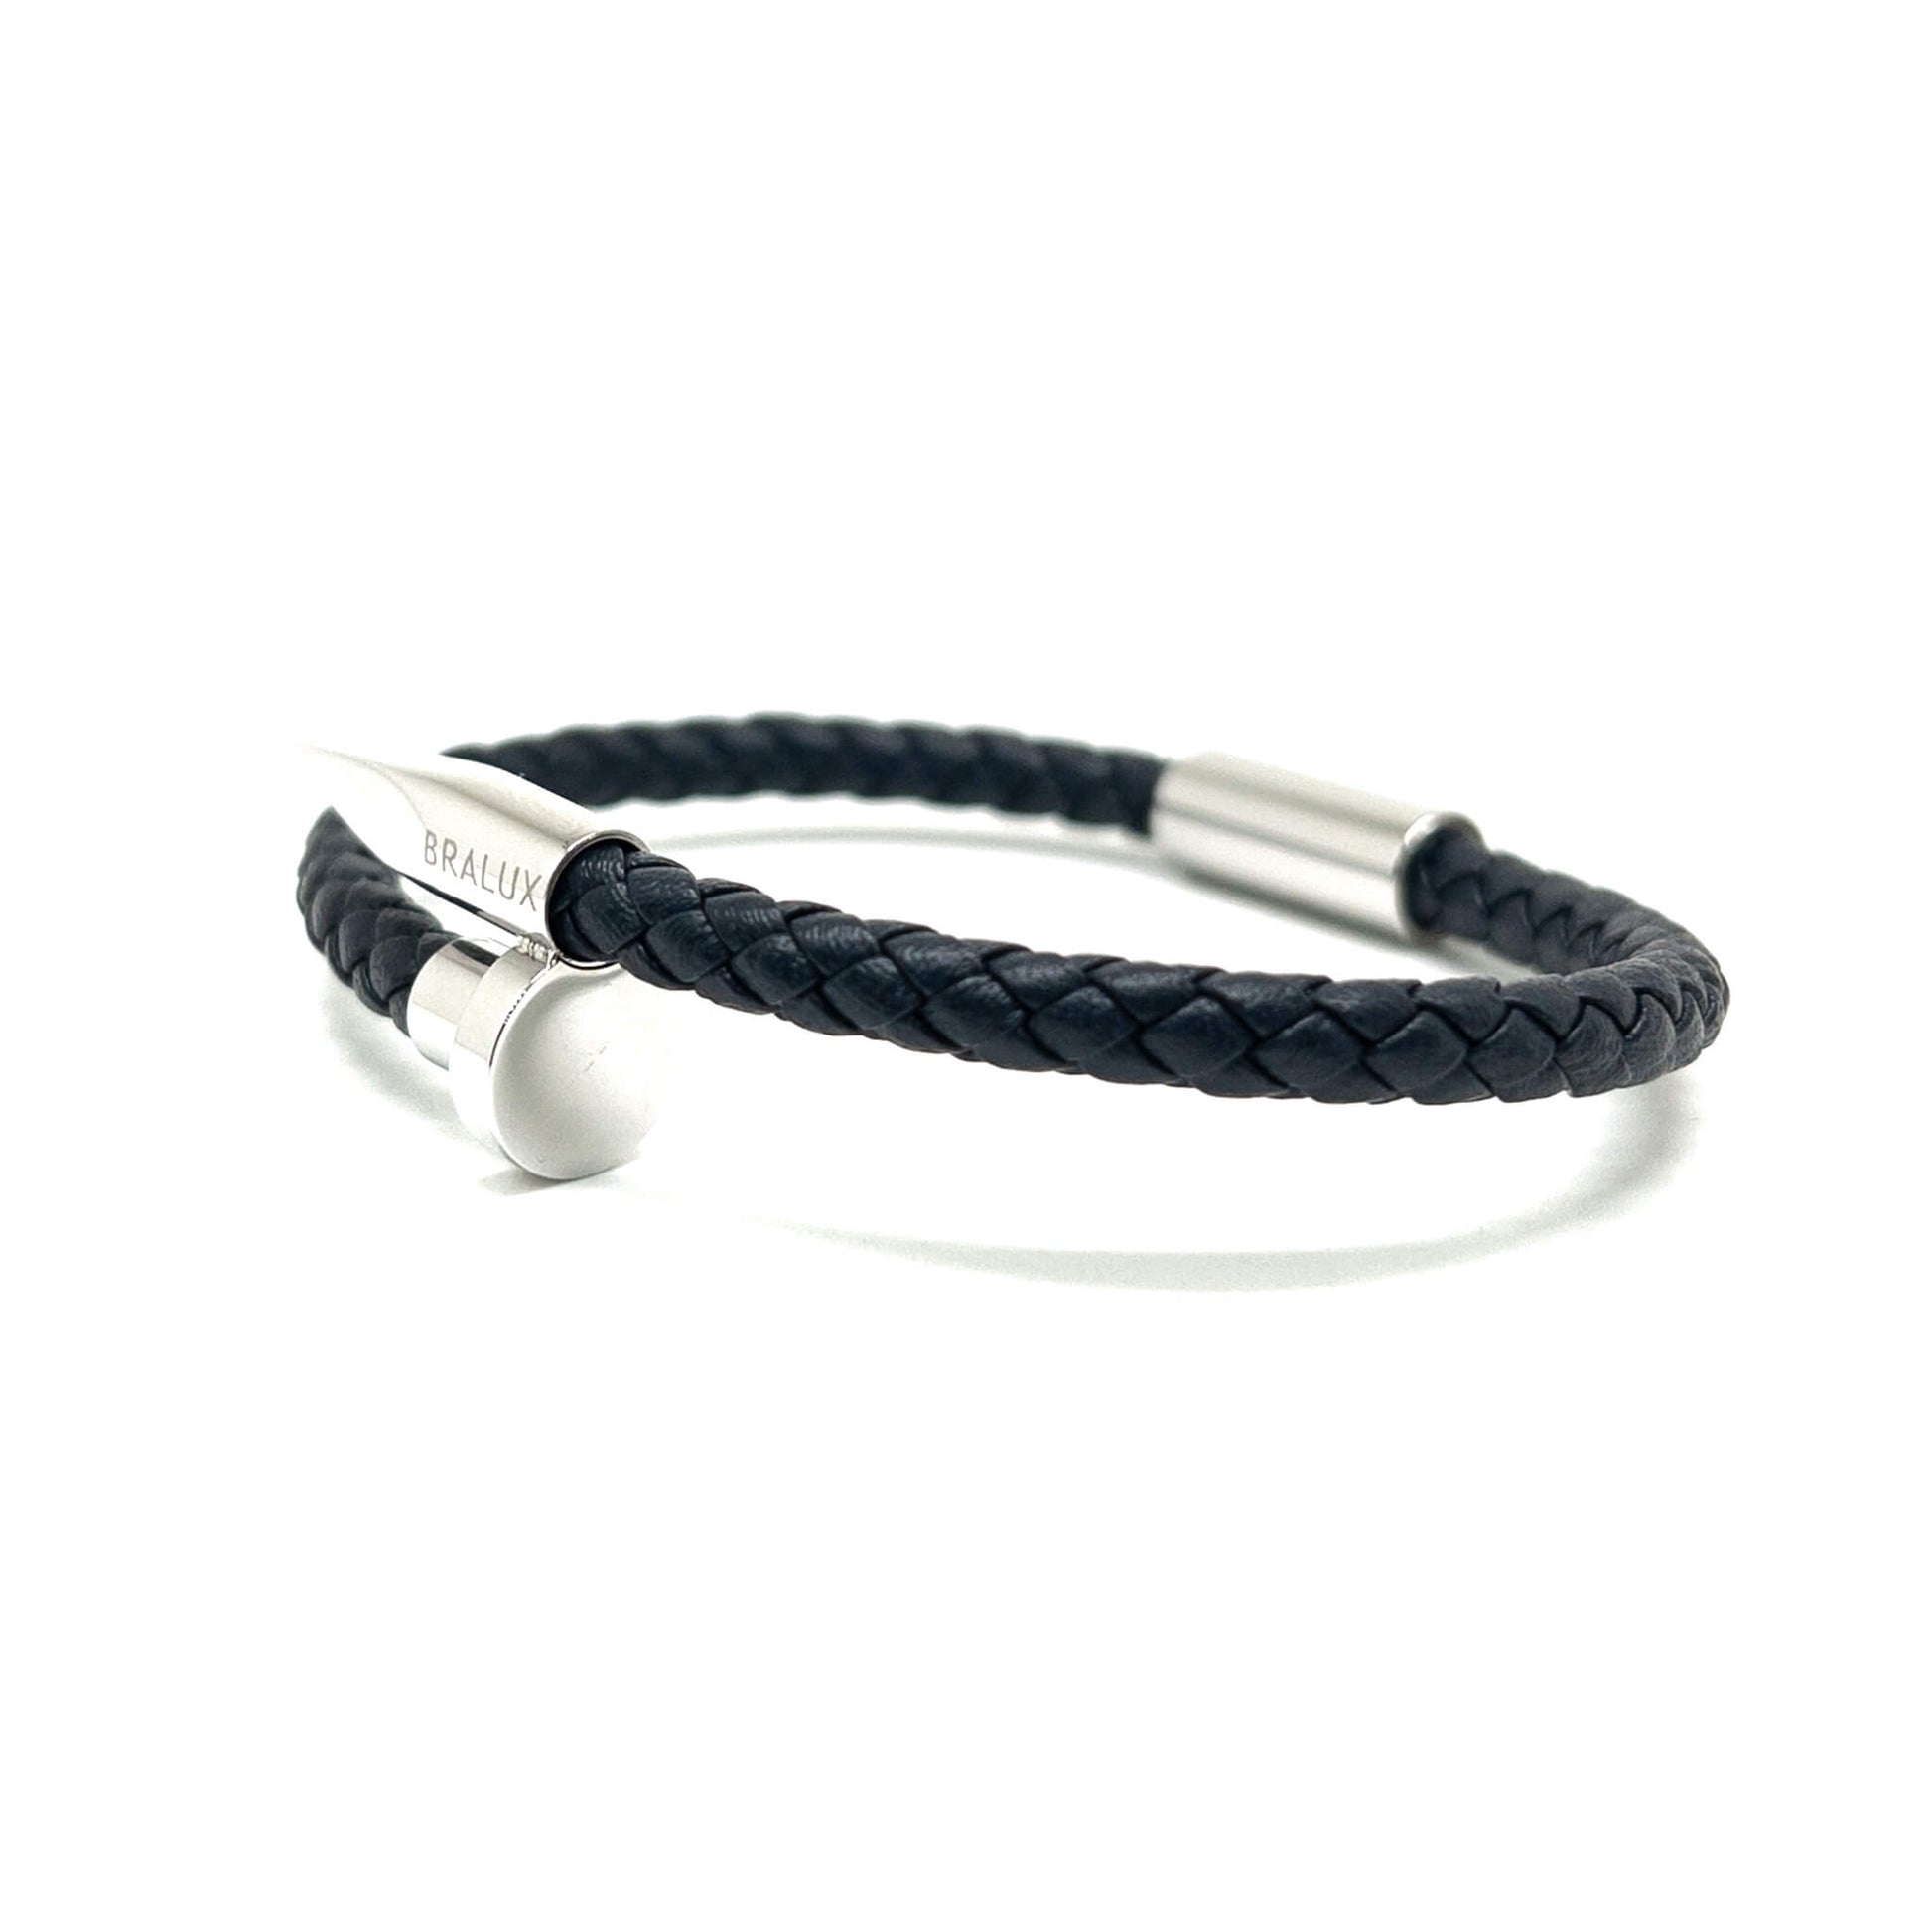 BRALUX - The Navy Leather and Matte Buckle Bracelet – Bralux